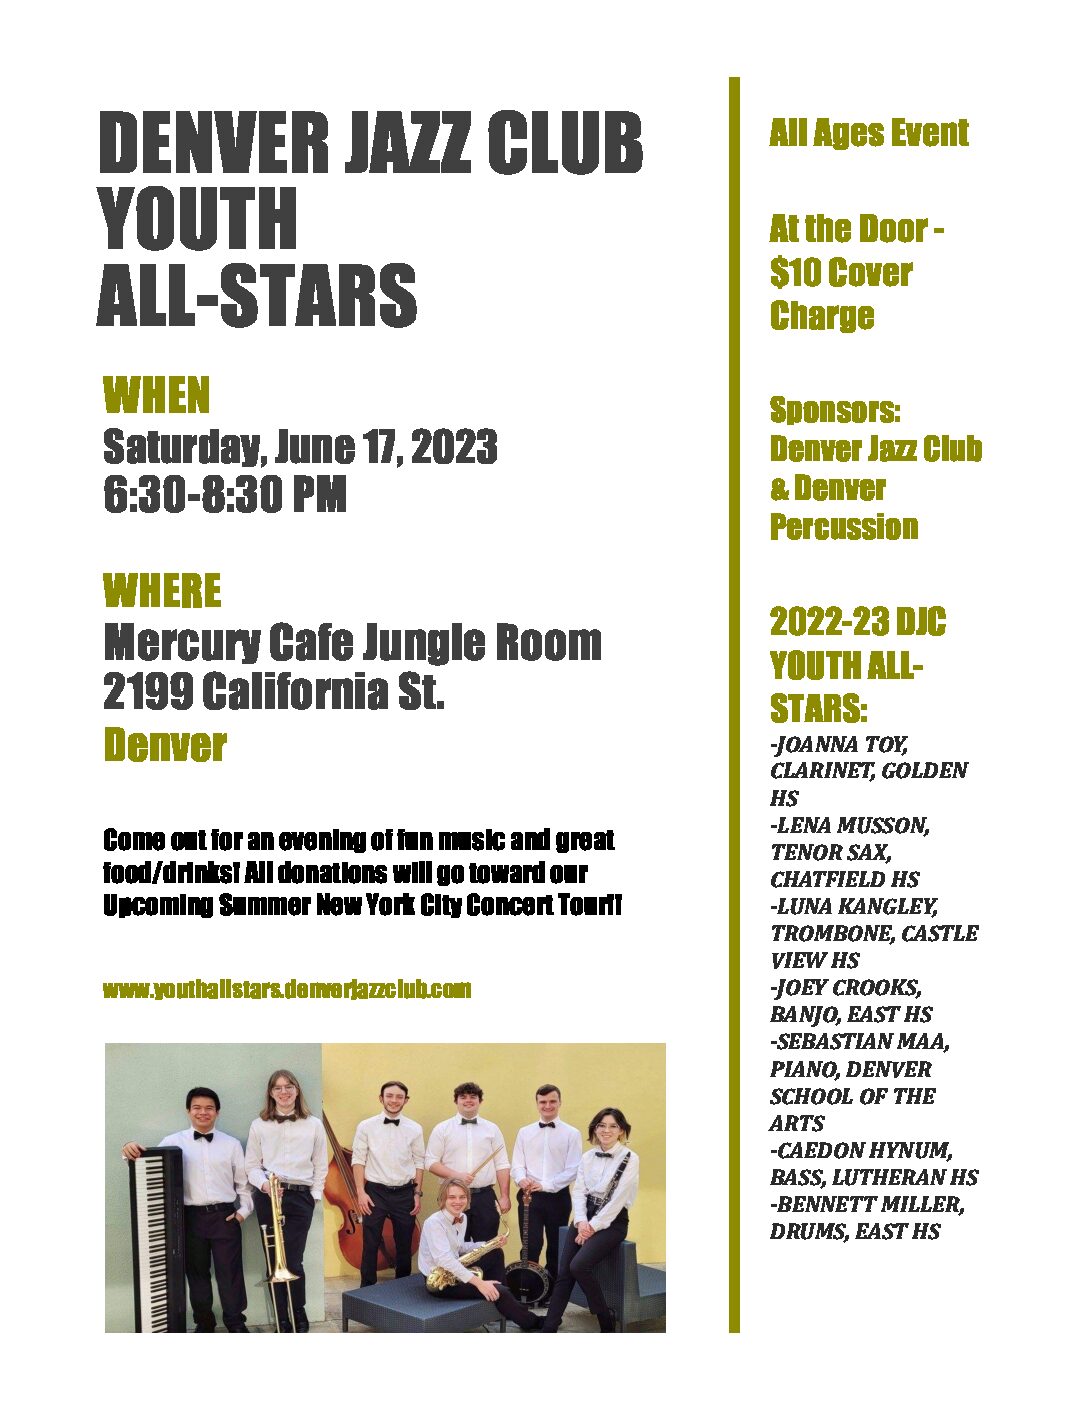 Mercury Cafe to Host the Denver Jazz Club Youth All-Stars on Saturday, June 17th (6:30-8:30pm) & the Downtown Denver 16th St. Mall to Feature the All-Stars on Sunday, June 18th (3-8:30pm)